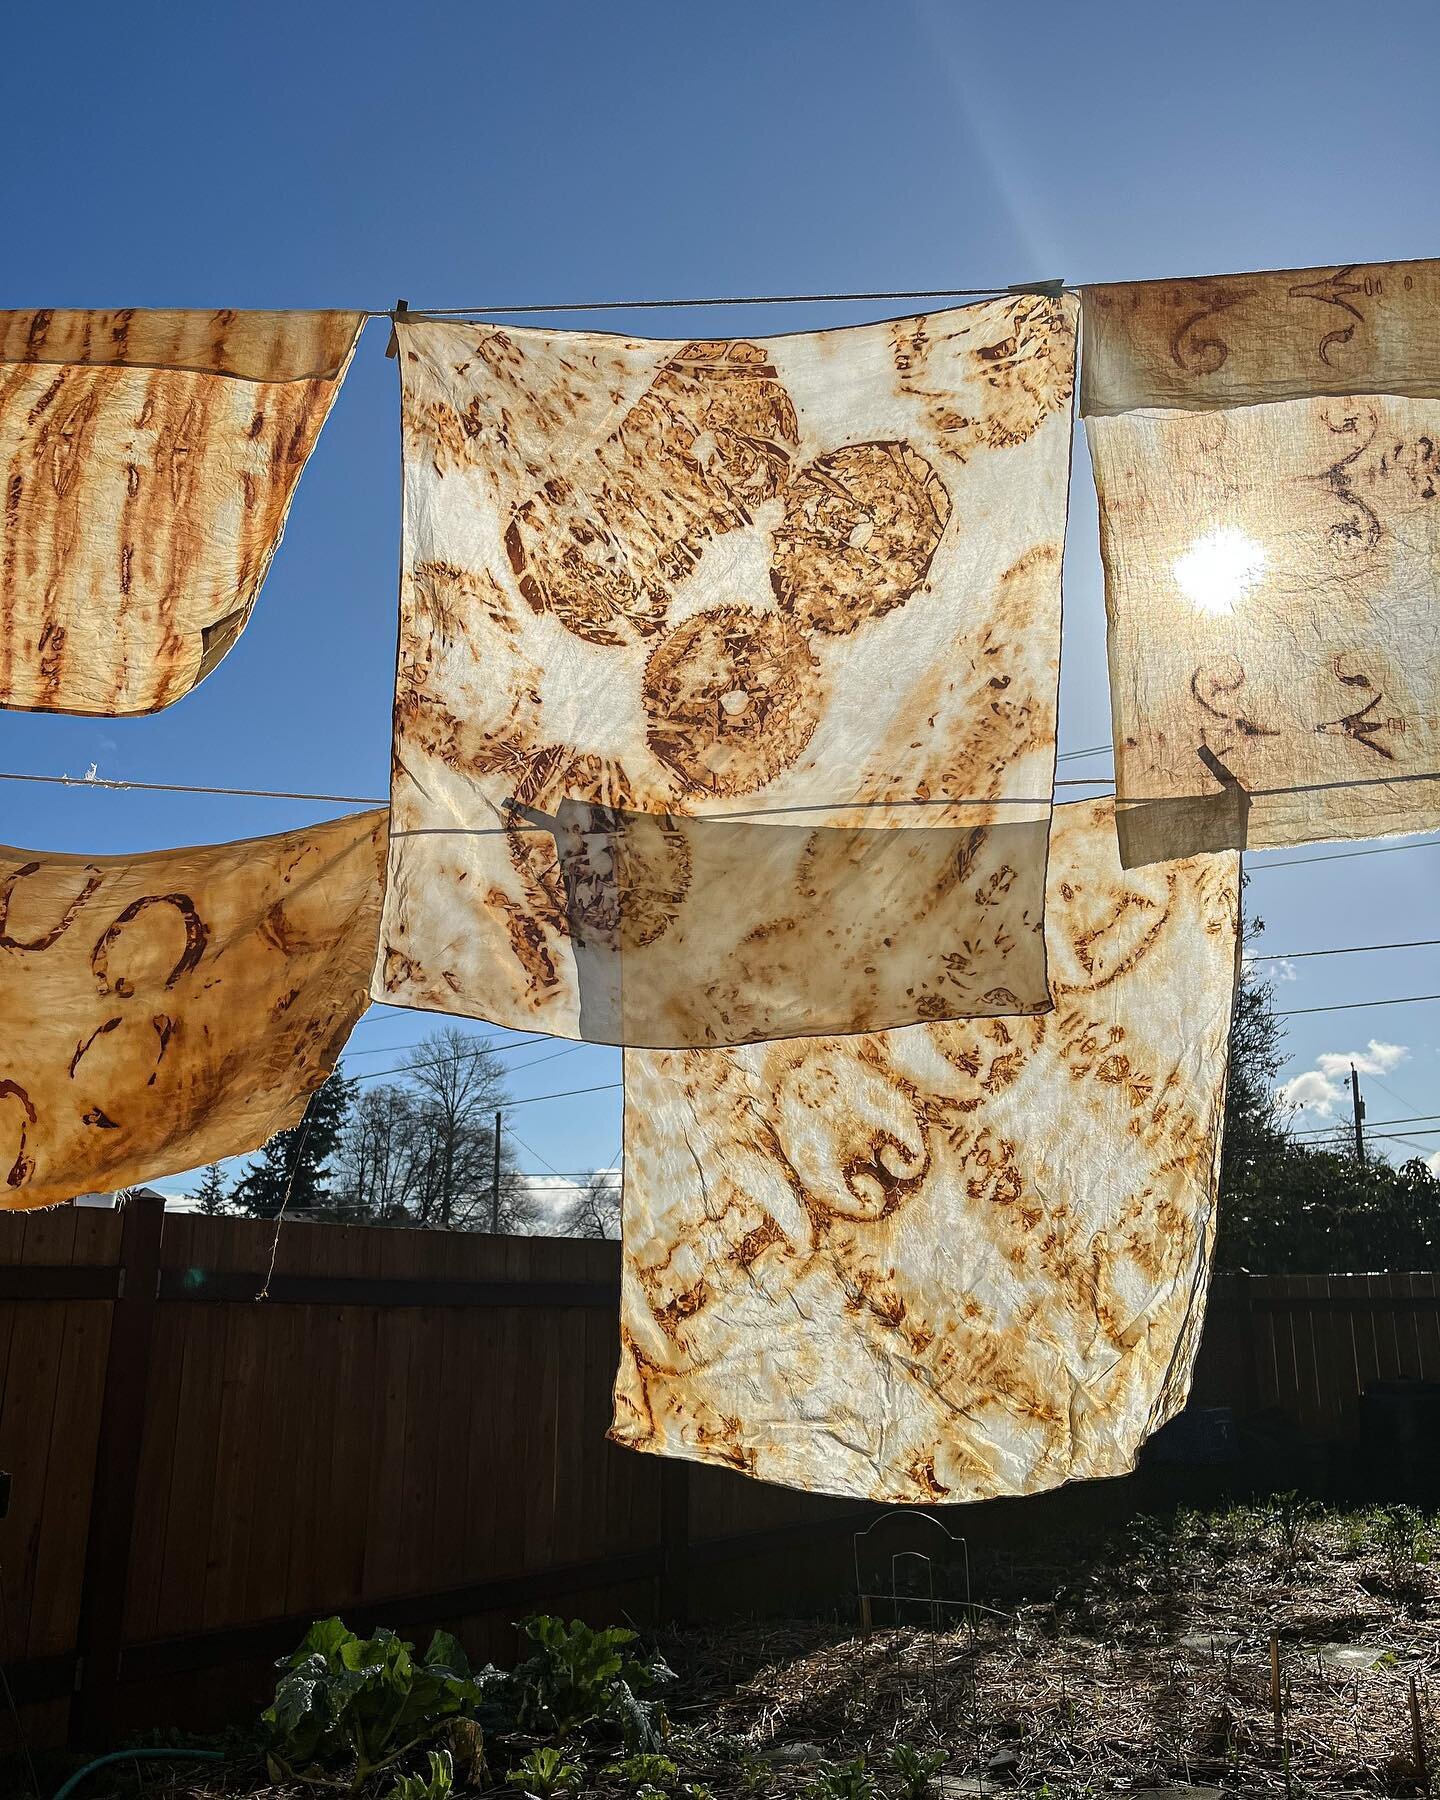 Here&rsquo;s a little something different - 
the dyeing projects go on, and this time I&rsquo;m using some help from rusty old sh*t I find 😜
These pieces were dyed with old decorative fencing, horse shoes, bolts, wrenches, and obviously, saw blades.